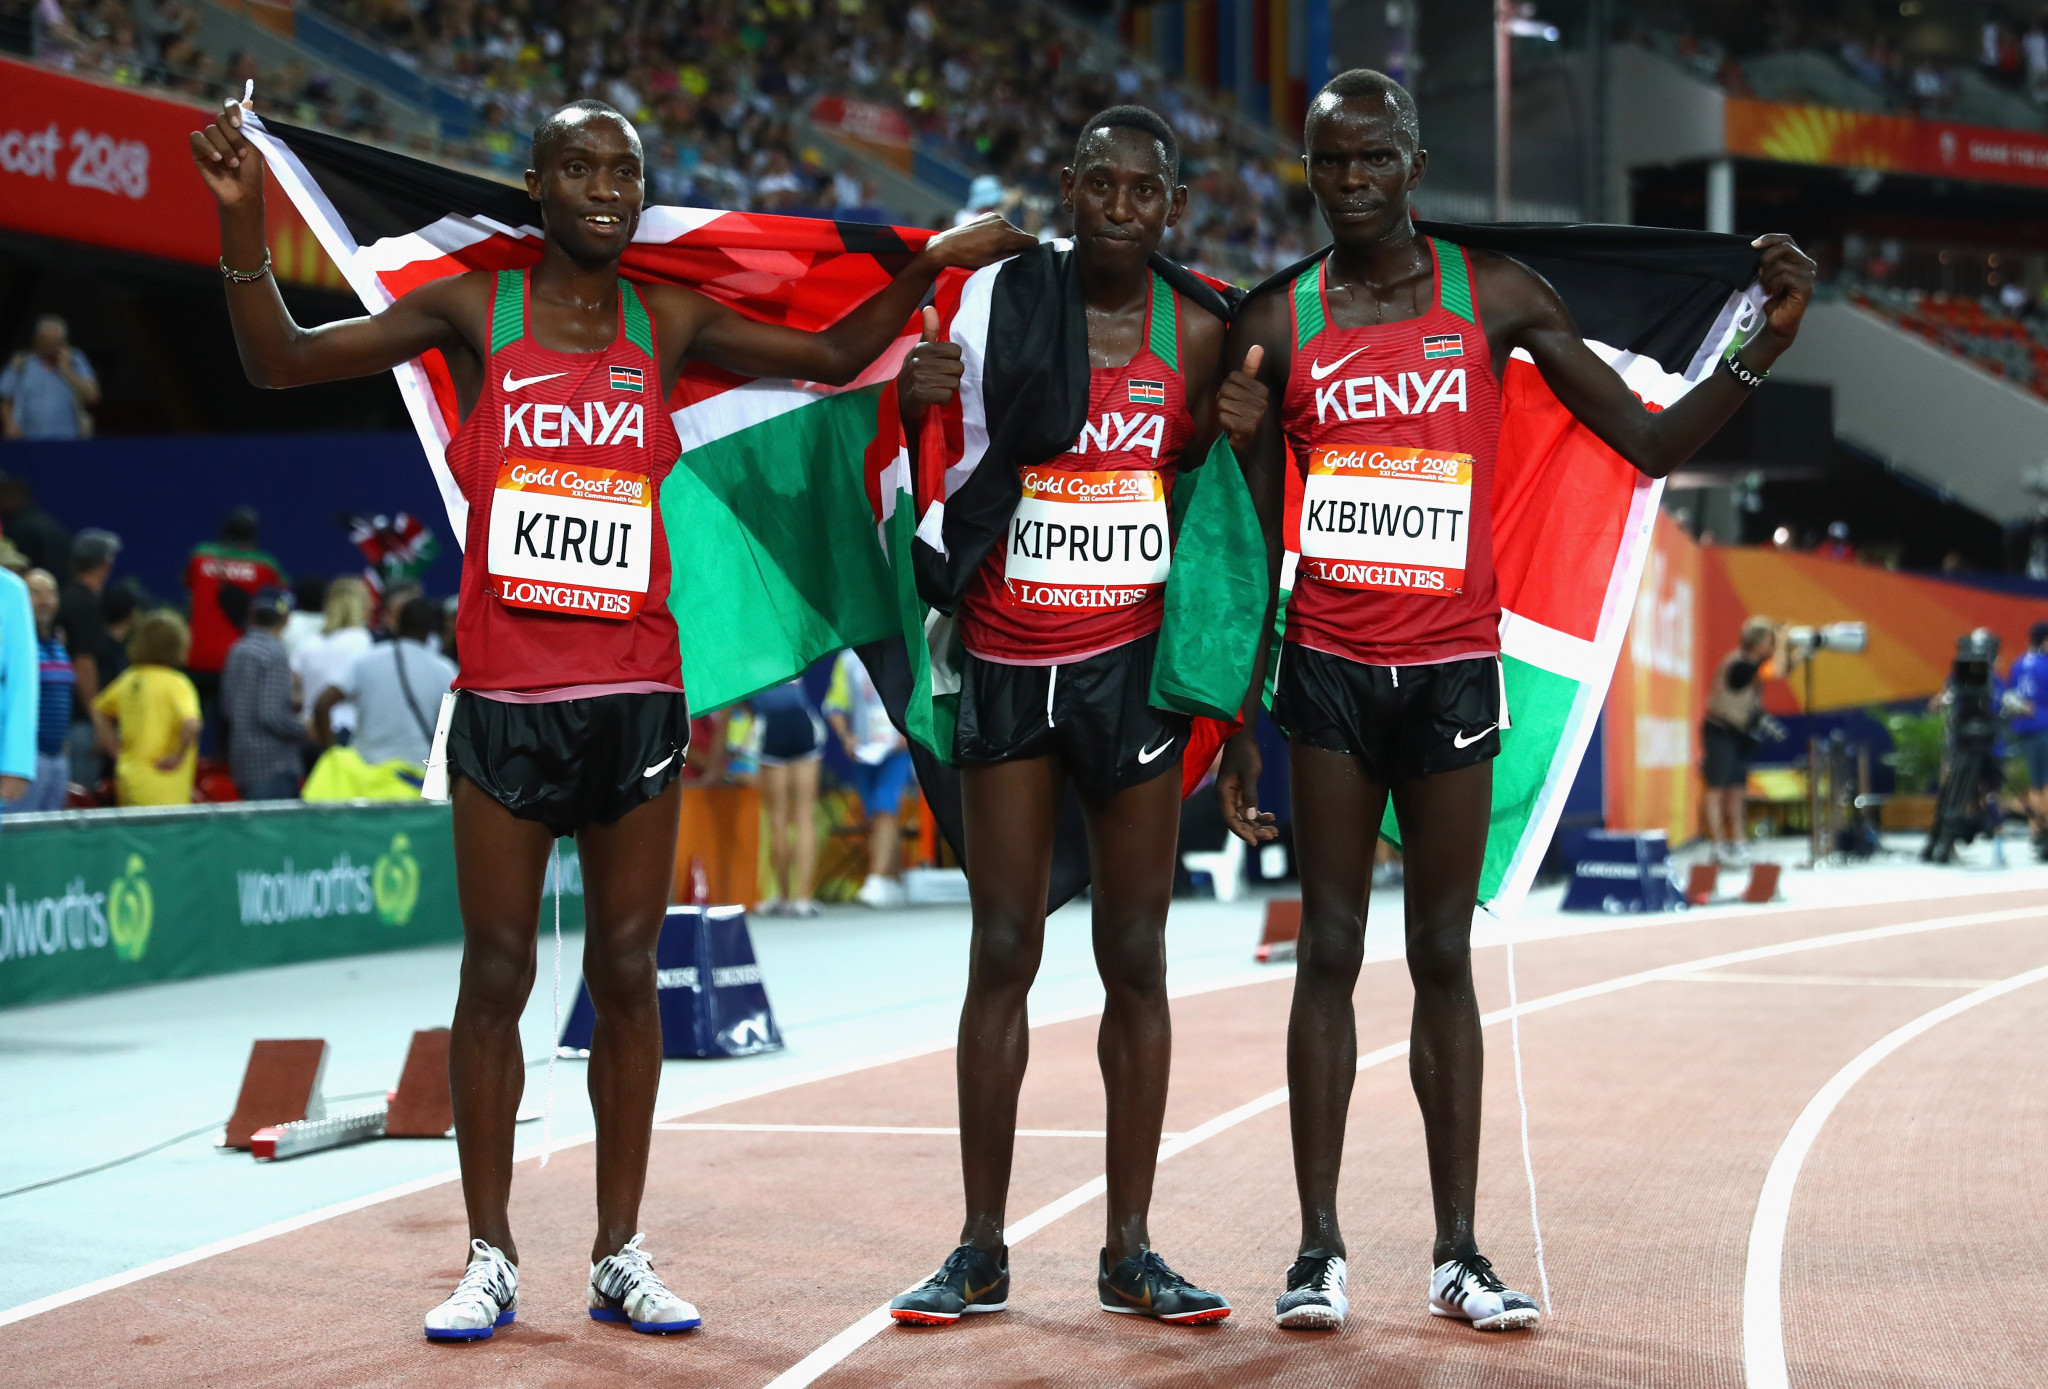 Most of Kenya's Commonwealth Games' medals come from events in athletics ©Getty Images